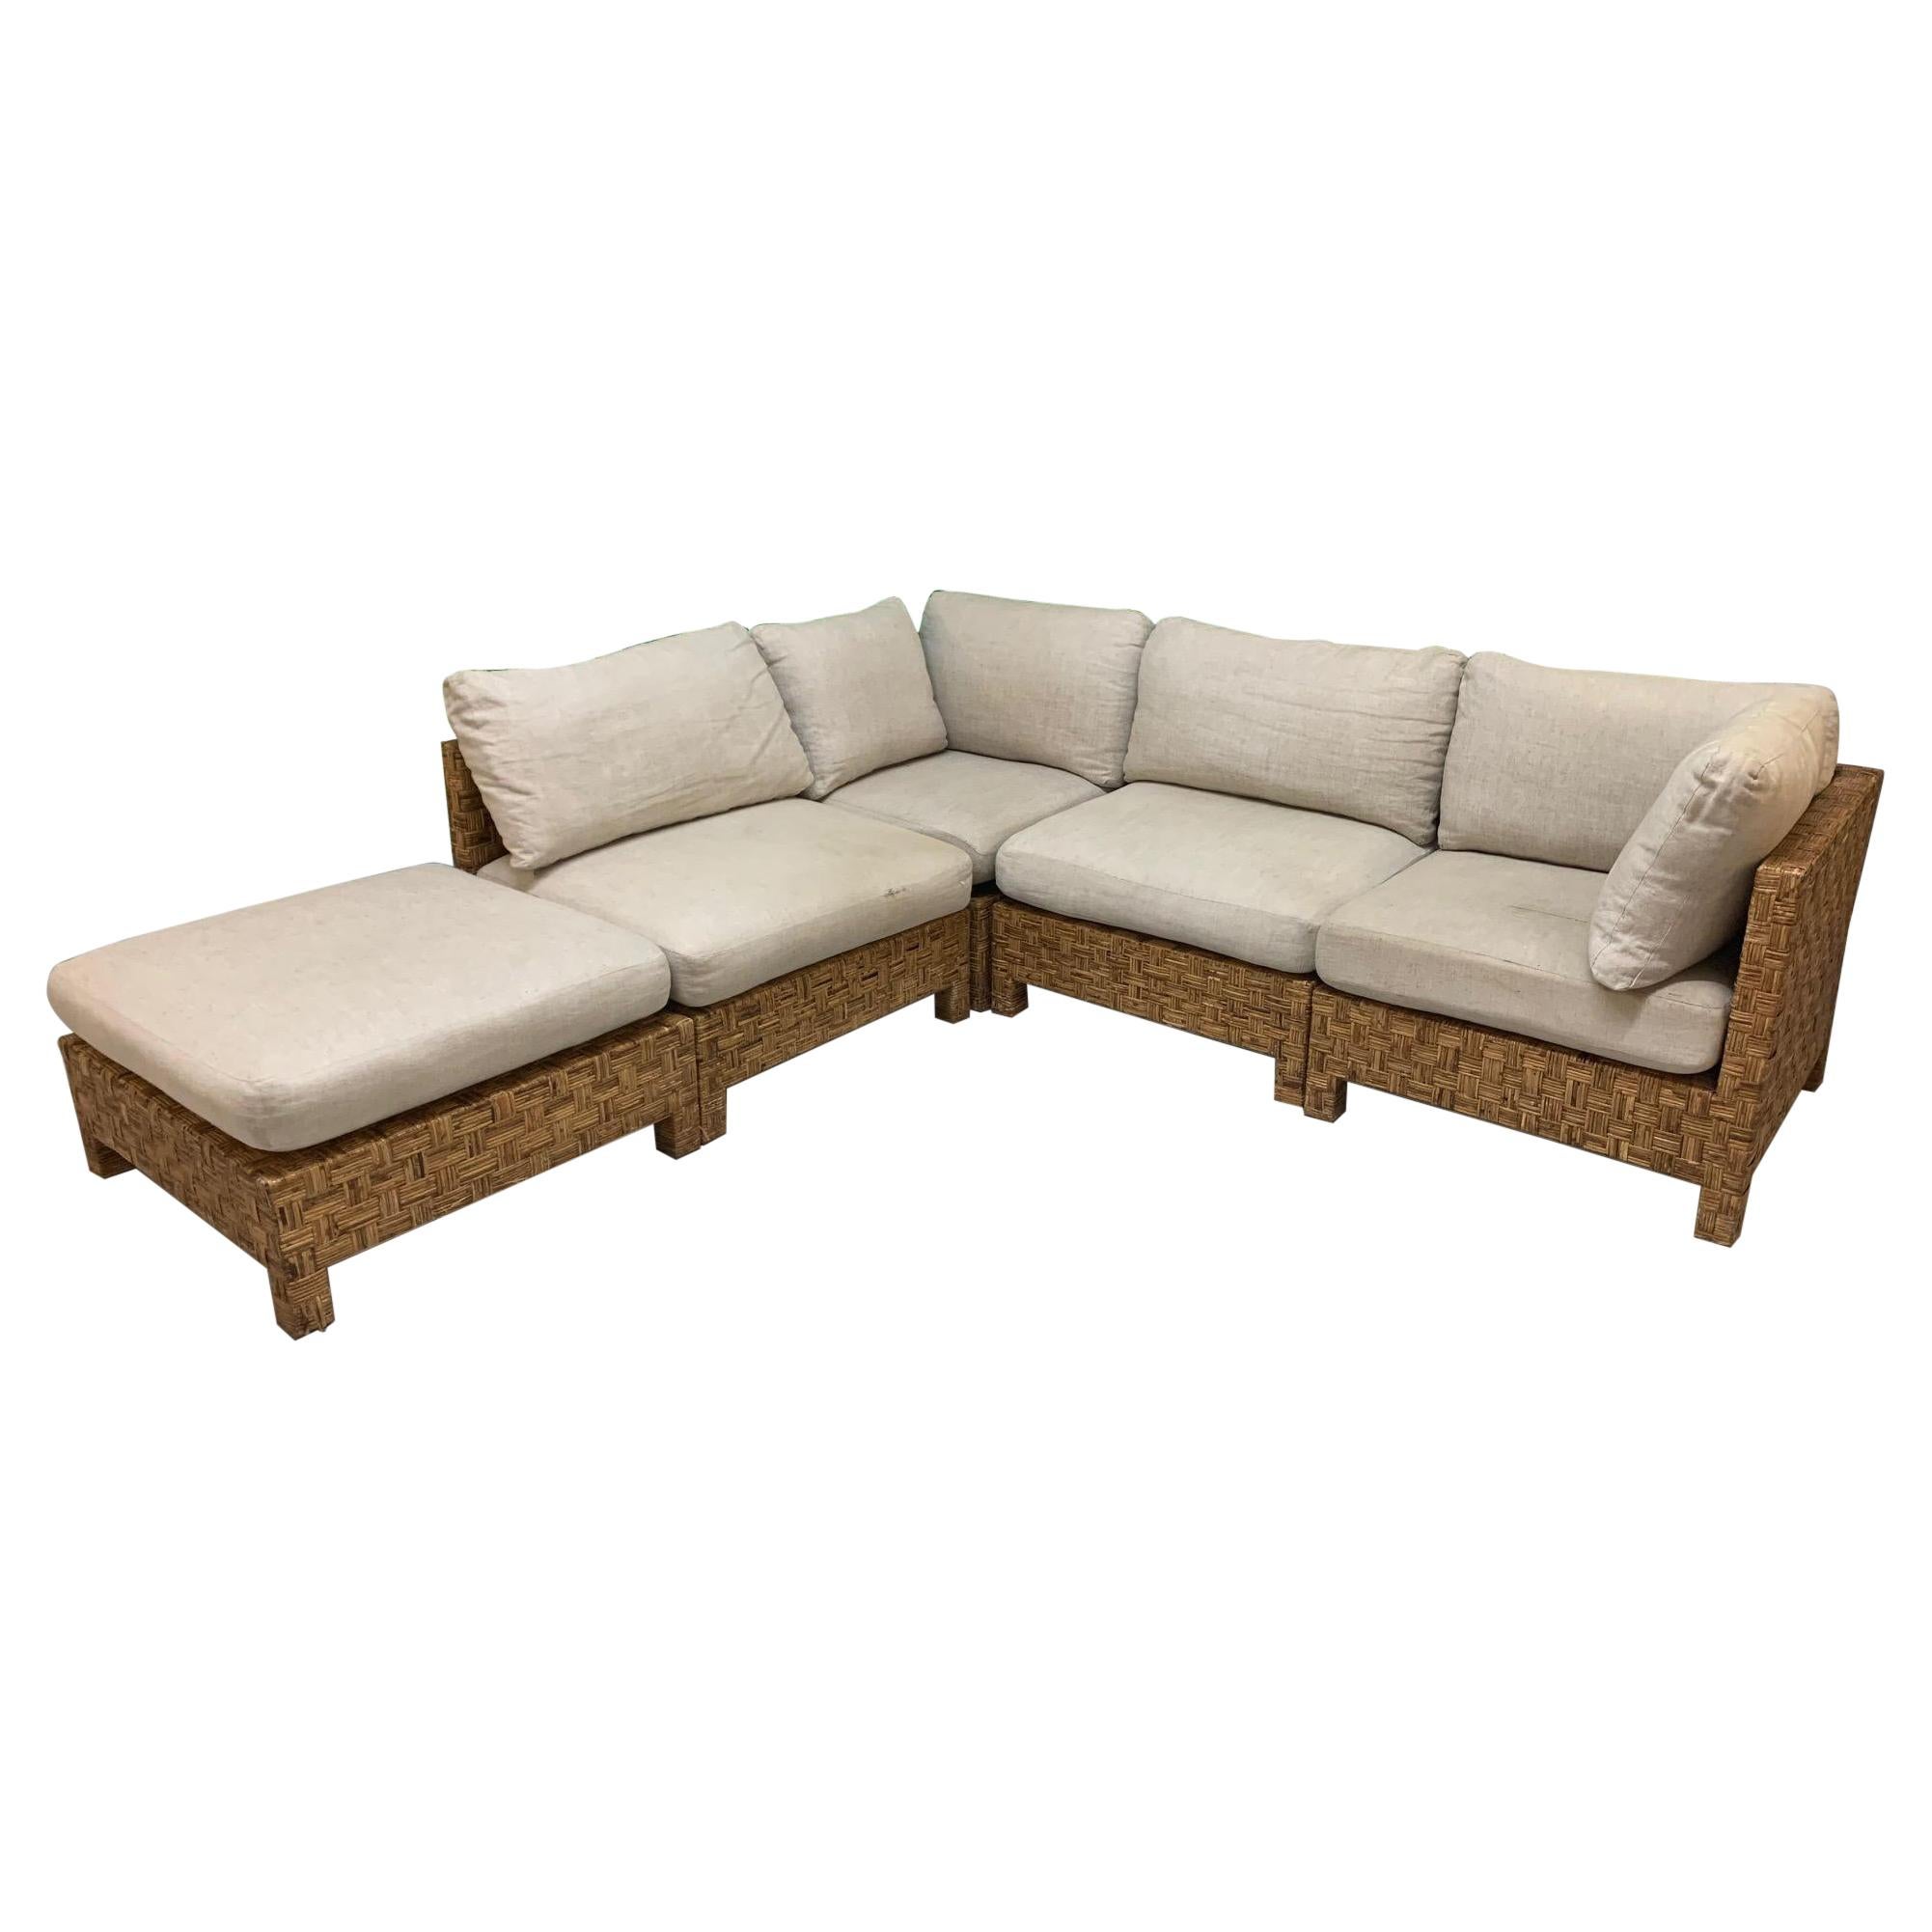 Block Wicker Woven 5 Piece Sectional Sofa For Sale